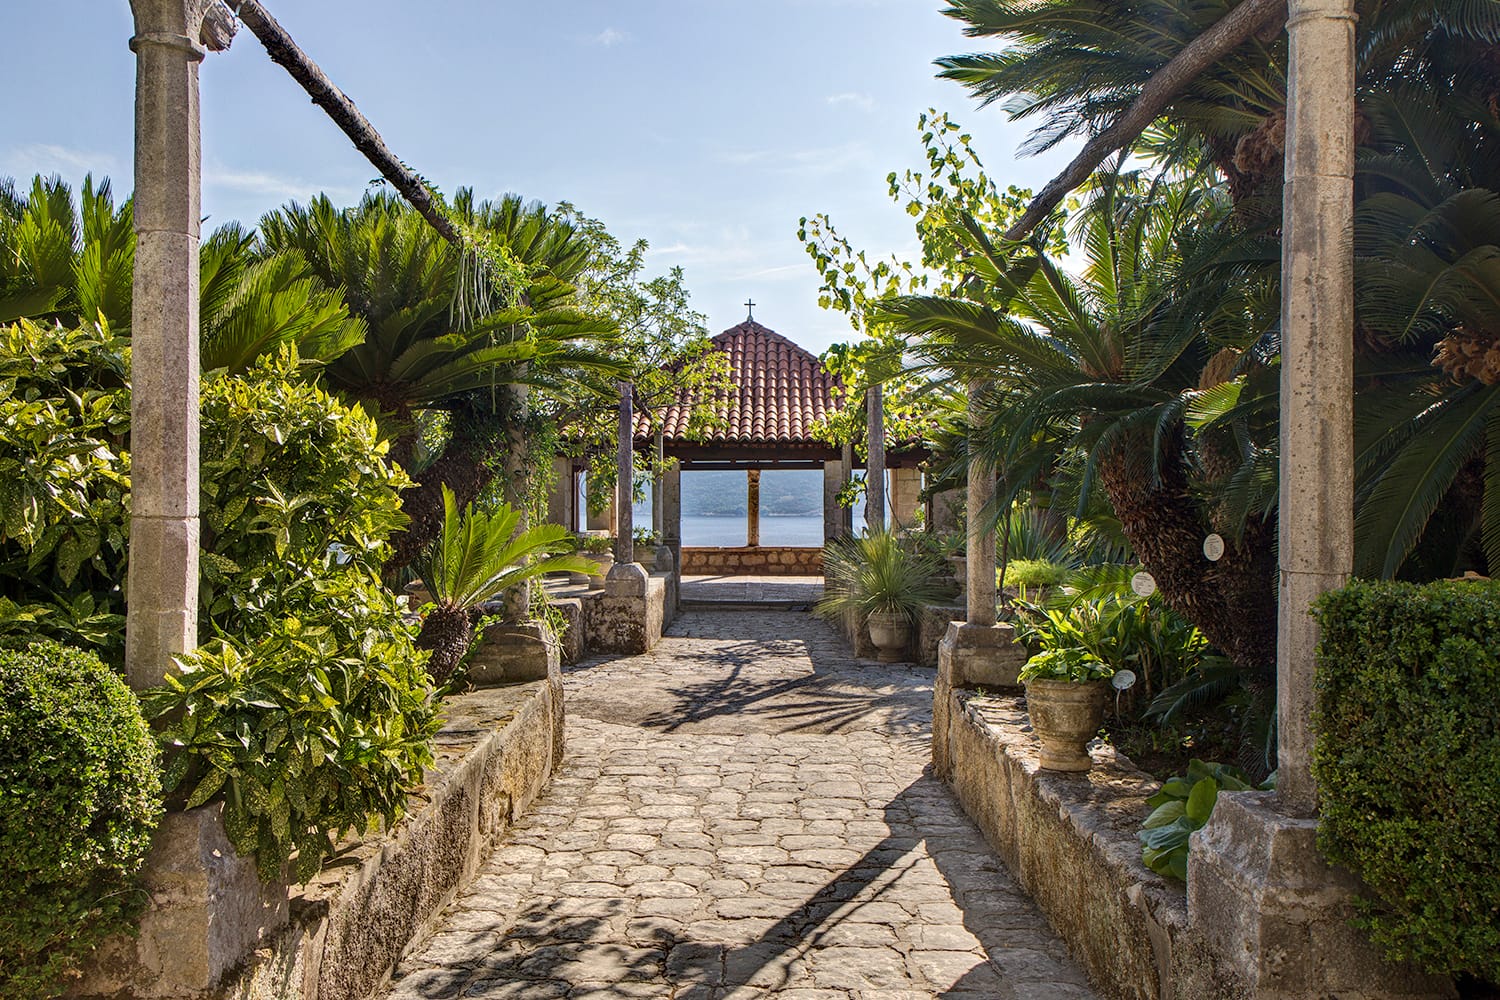 Lush vegetation, paved passageway and a pavilion at the arboretum in Trsteno, Croatia.